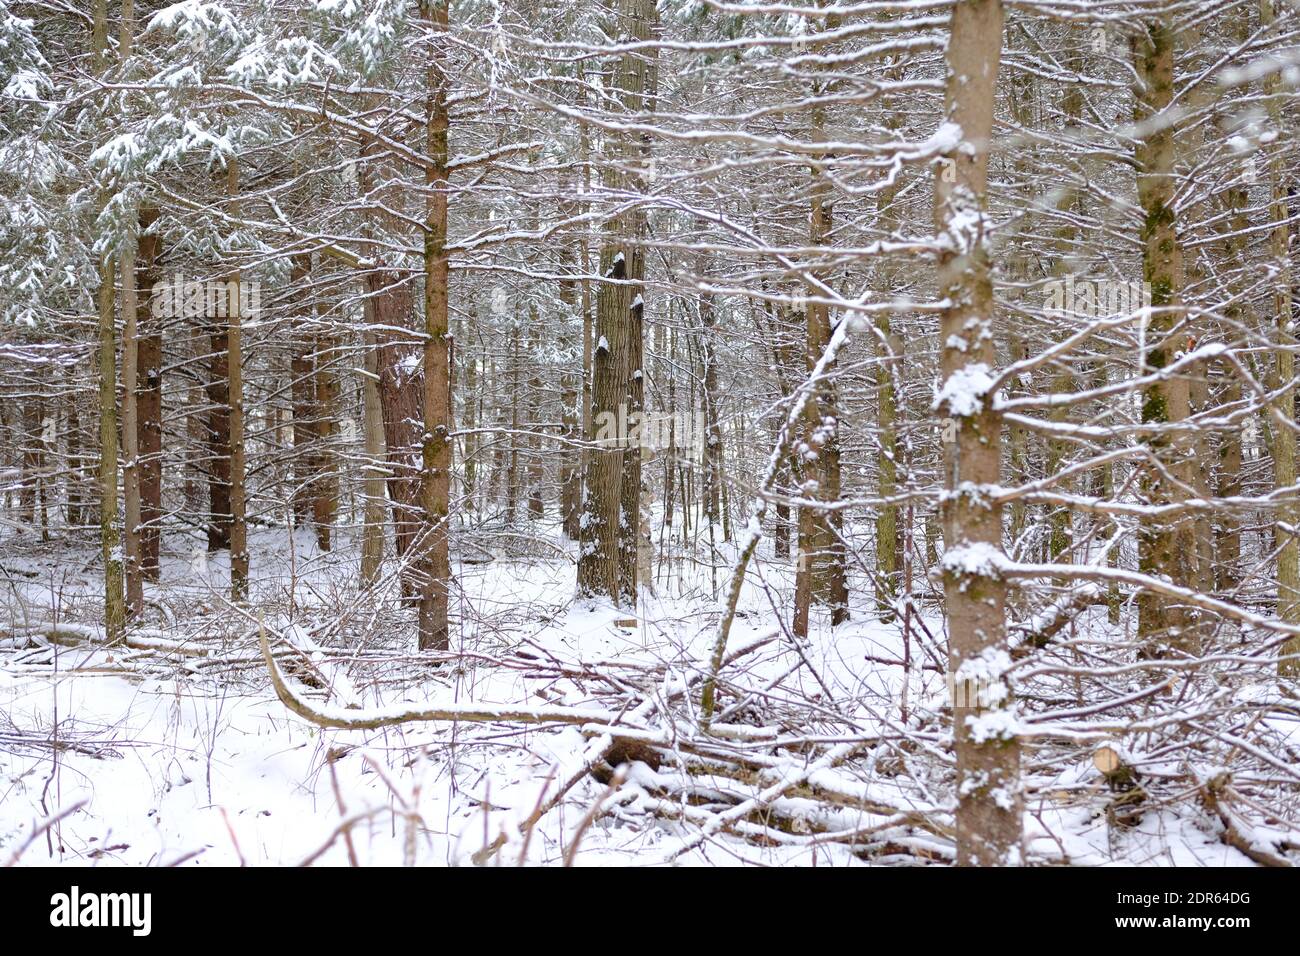 Snowy Ontario woods in winter with fresh snow laying on branches and fallen trunks. Ottawa, Canada. Stock Photo